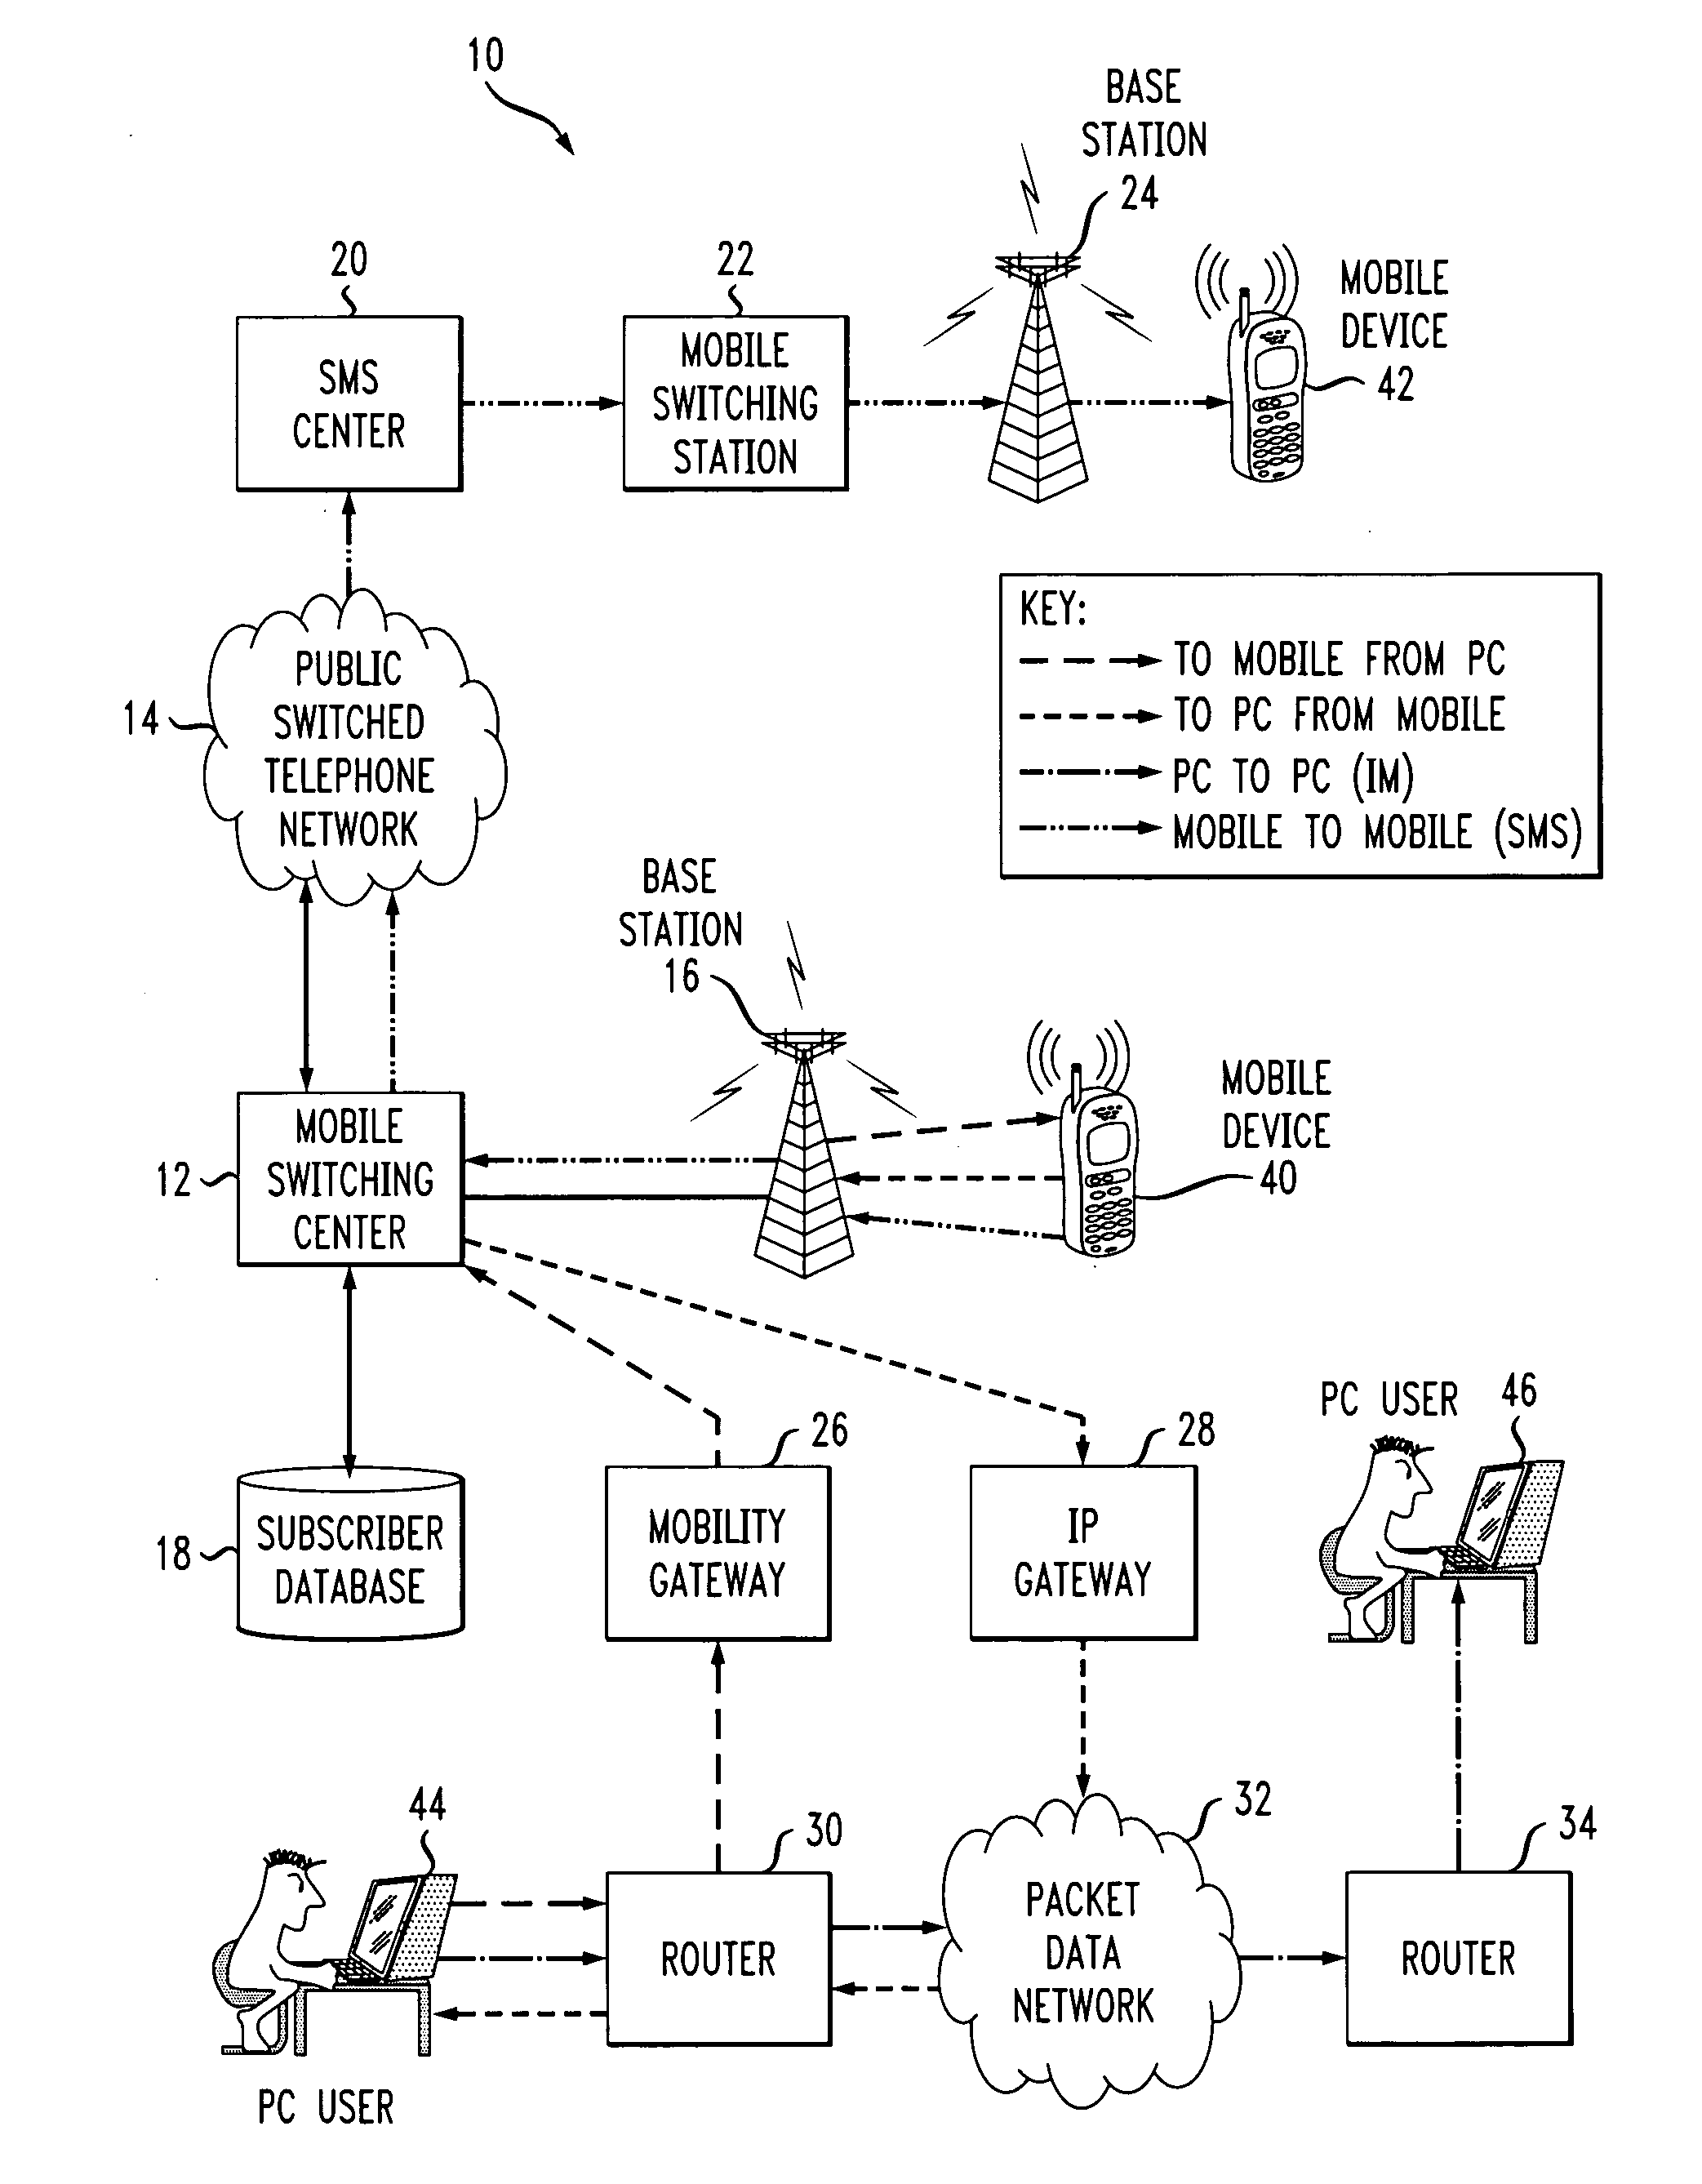 Method and system for providing network support for messaging between short message service (SMS) subscribers and instant messaging (IM) subscribers